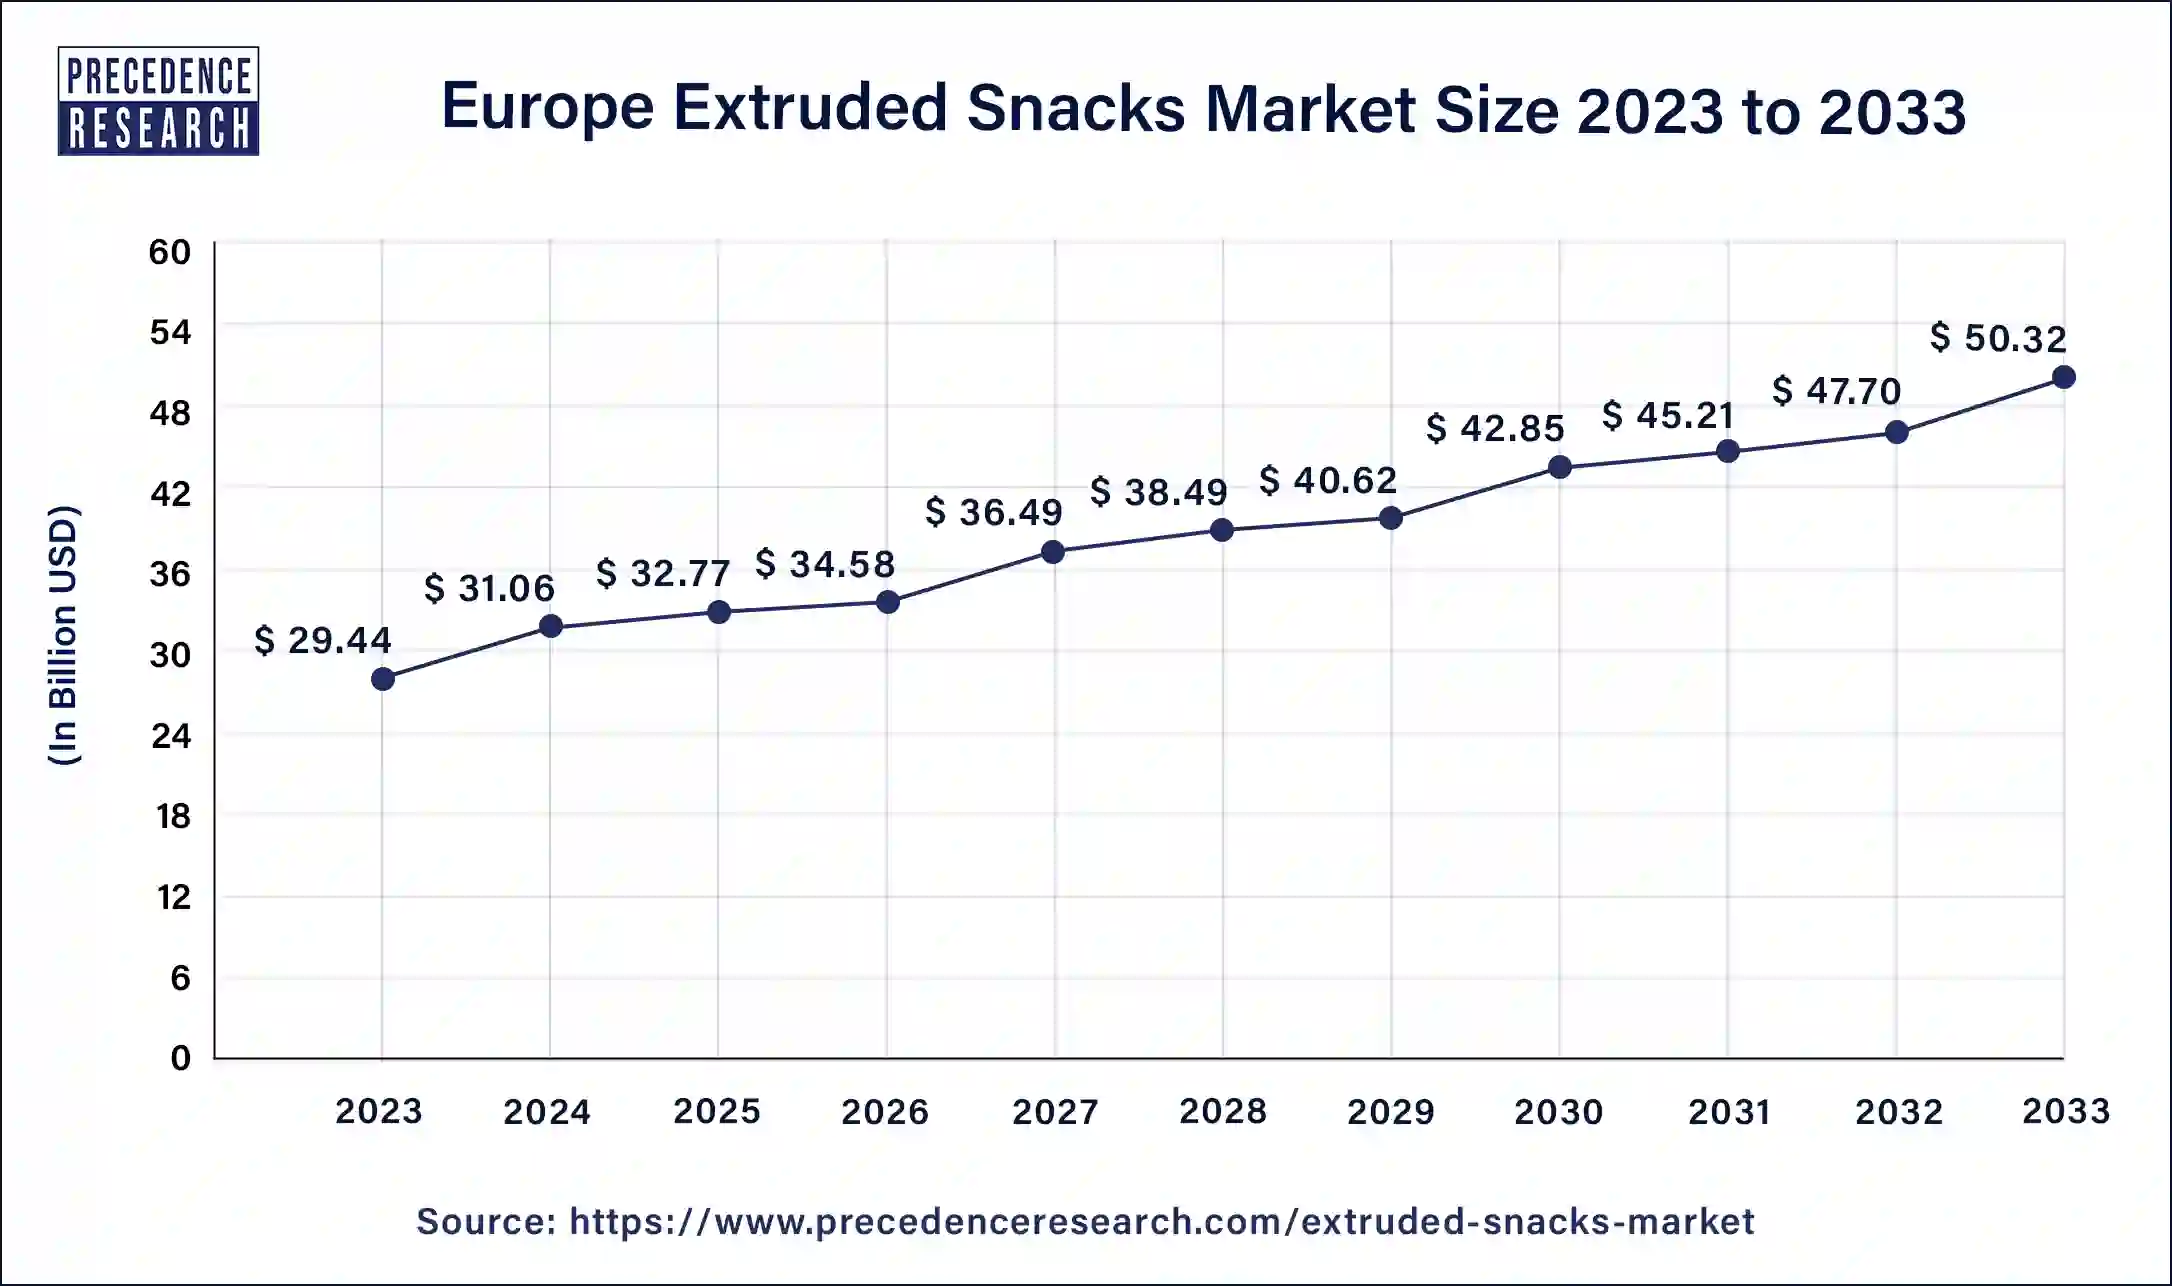 Europe Extruded Snacks Market Size 2024 to 2033